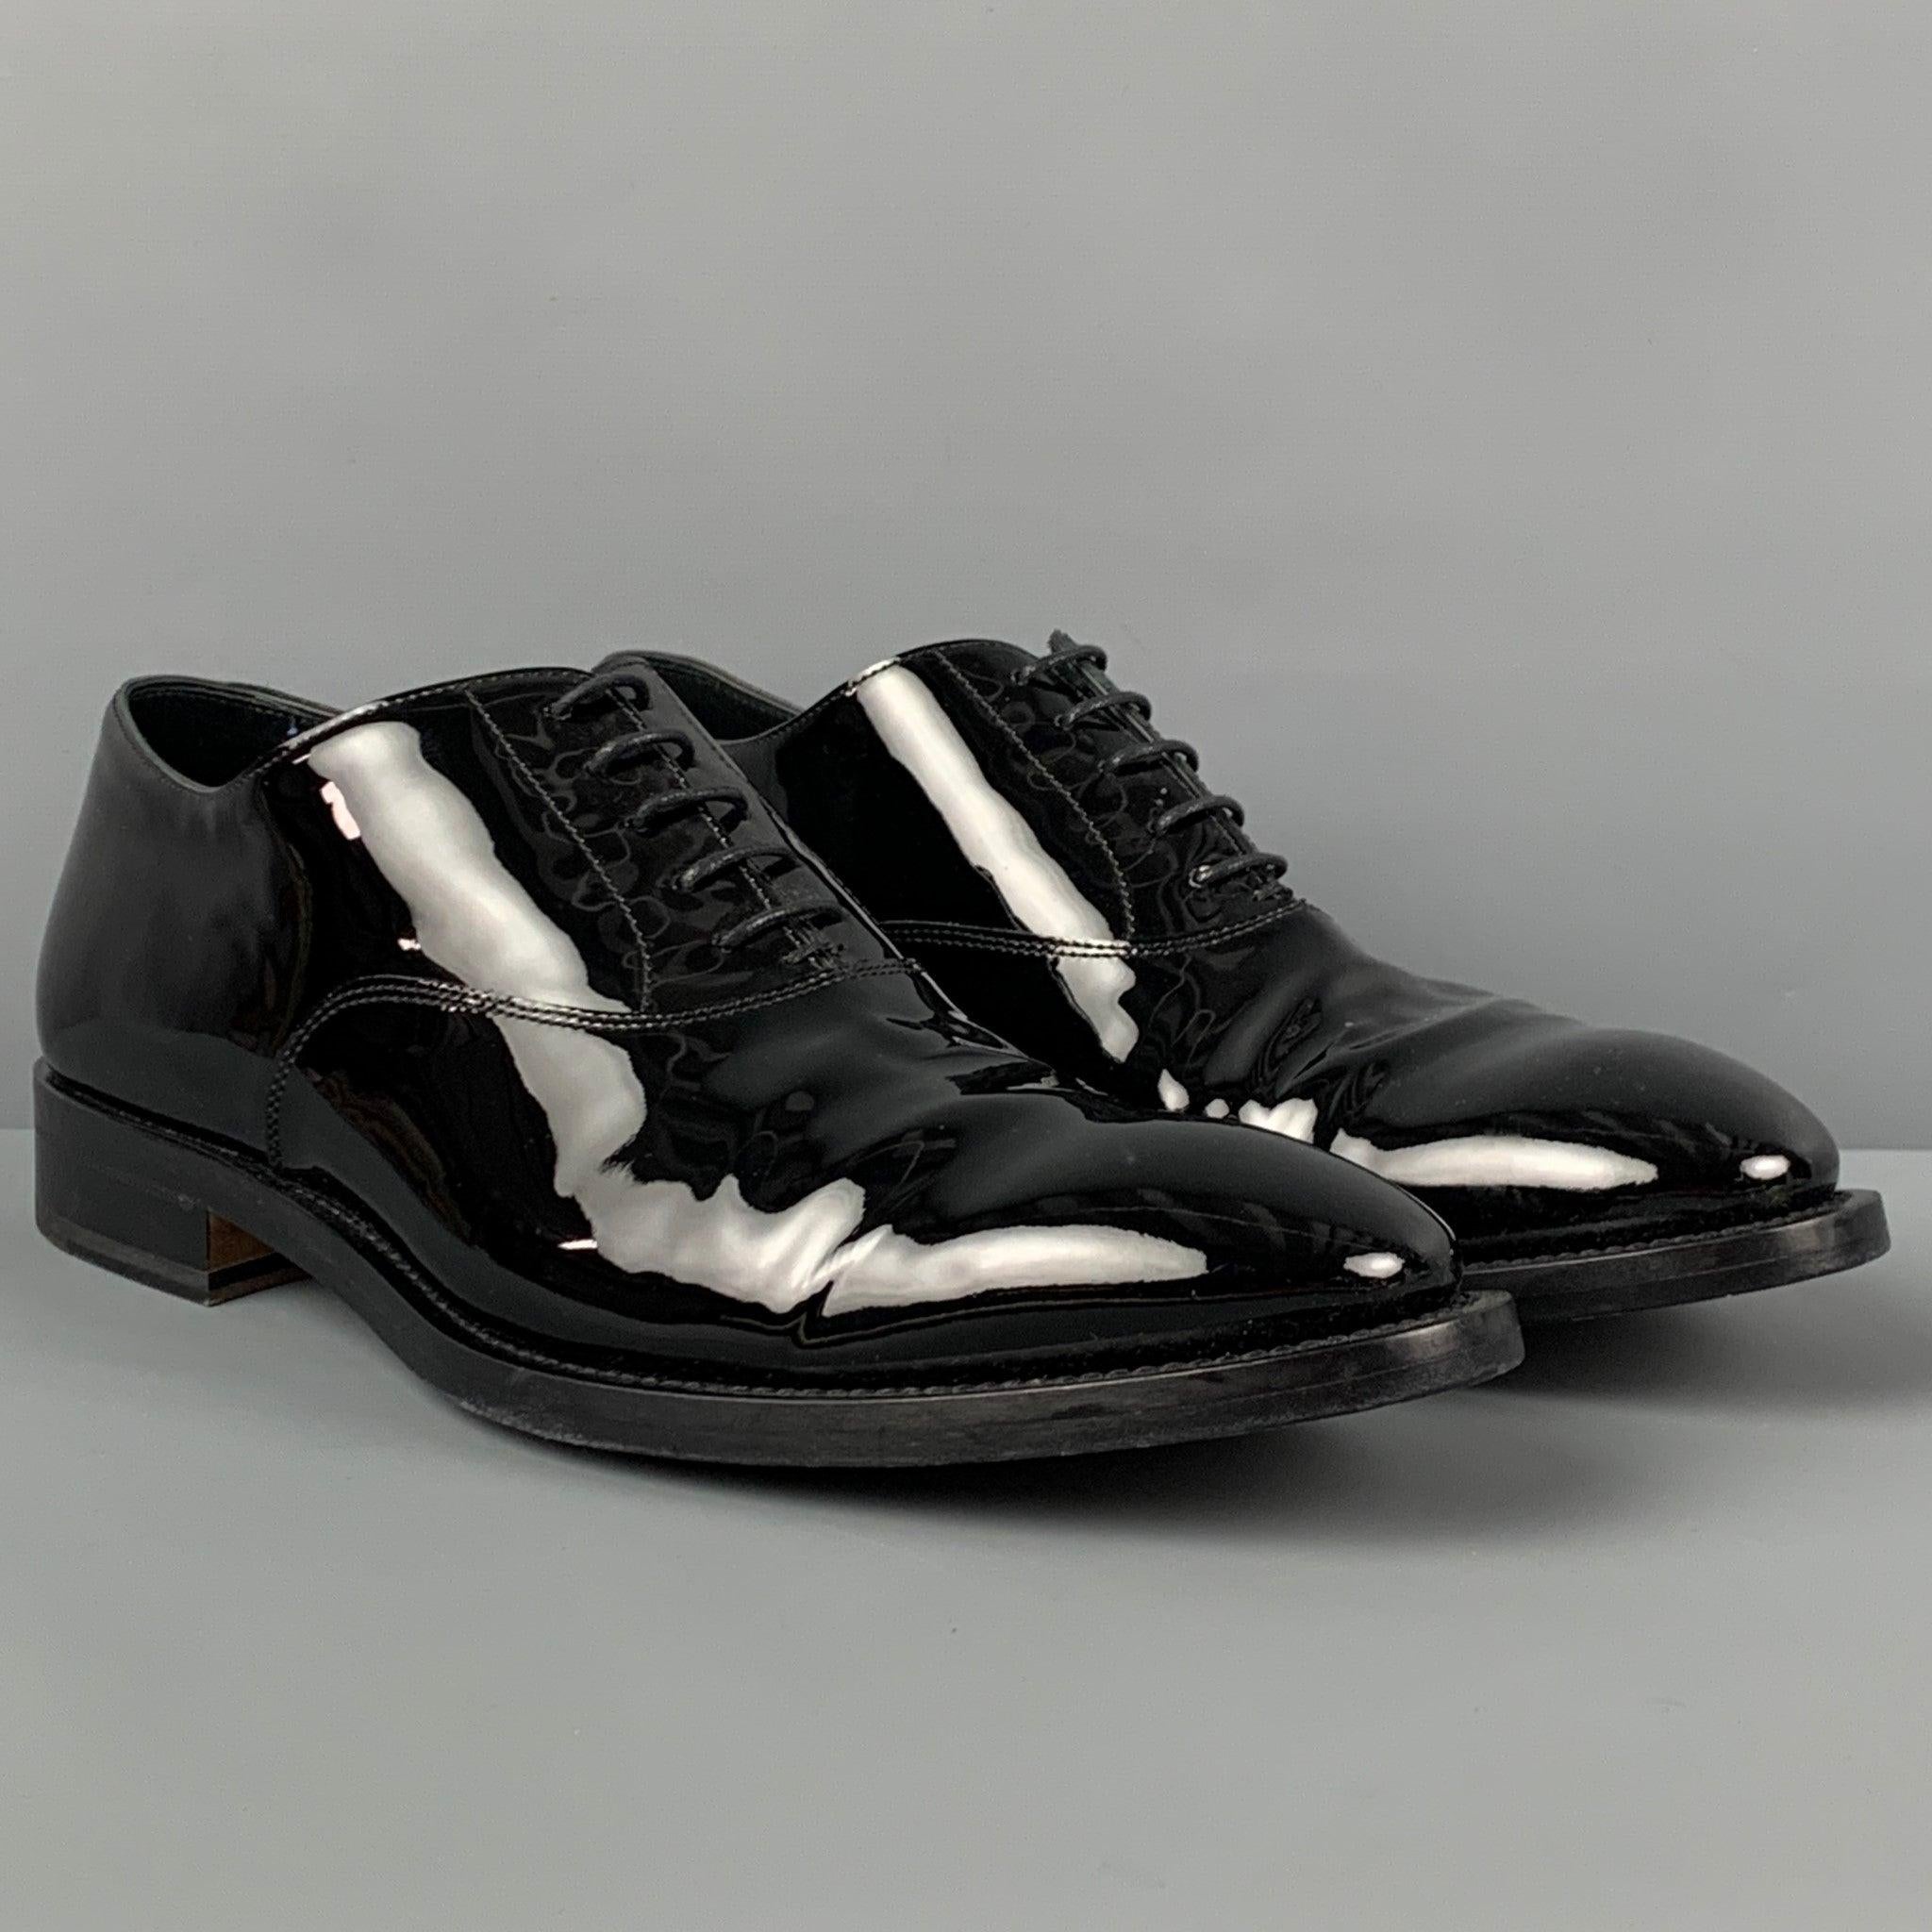 PAUL SMITH shoes comes in a black patent leather featuring a classic style and a lace up closure. Includes box. Made in Italy.
Excellent
Pre-Owned Condition. 

Marked:   9Outsole: 12.25 inches  x 4.25 inches 
  
  
 
Reference: 119565
Category: Lace